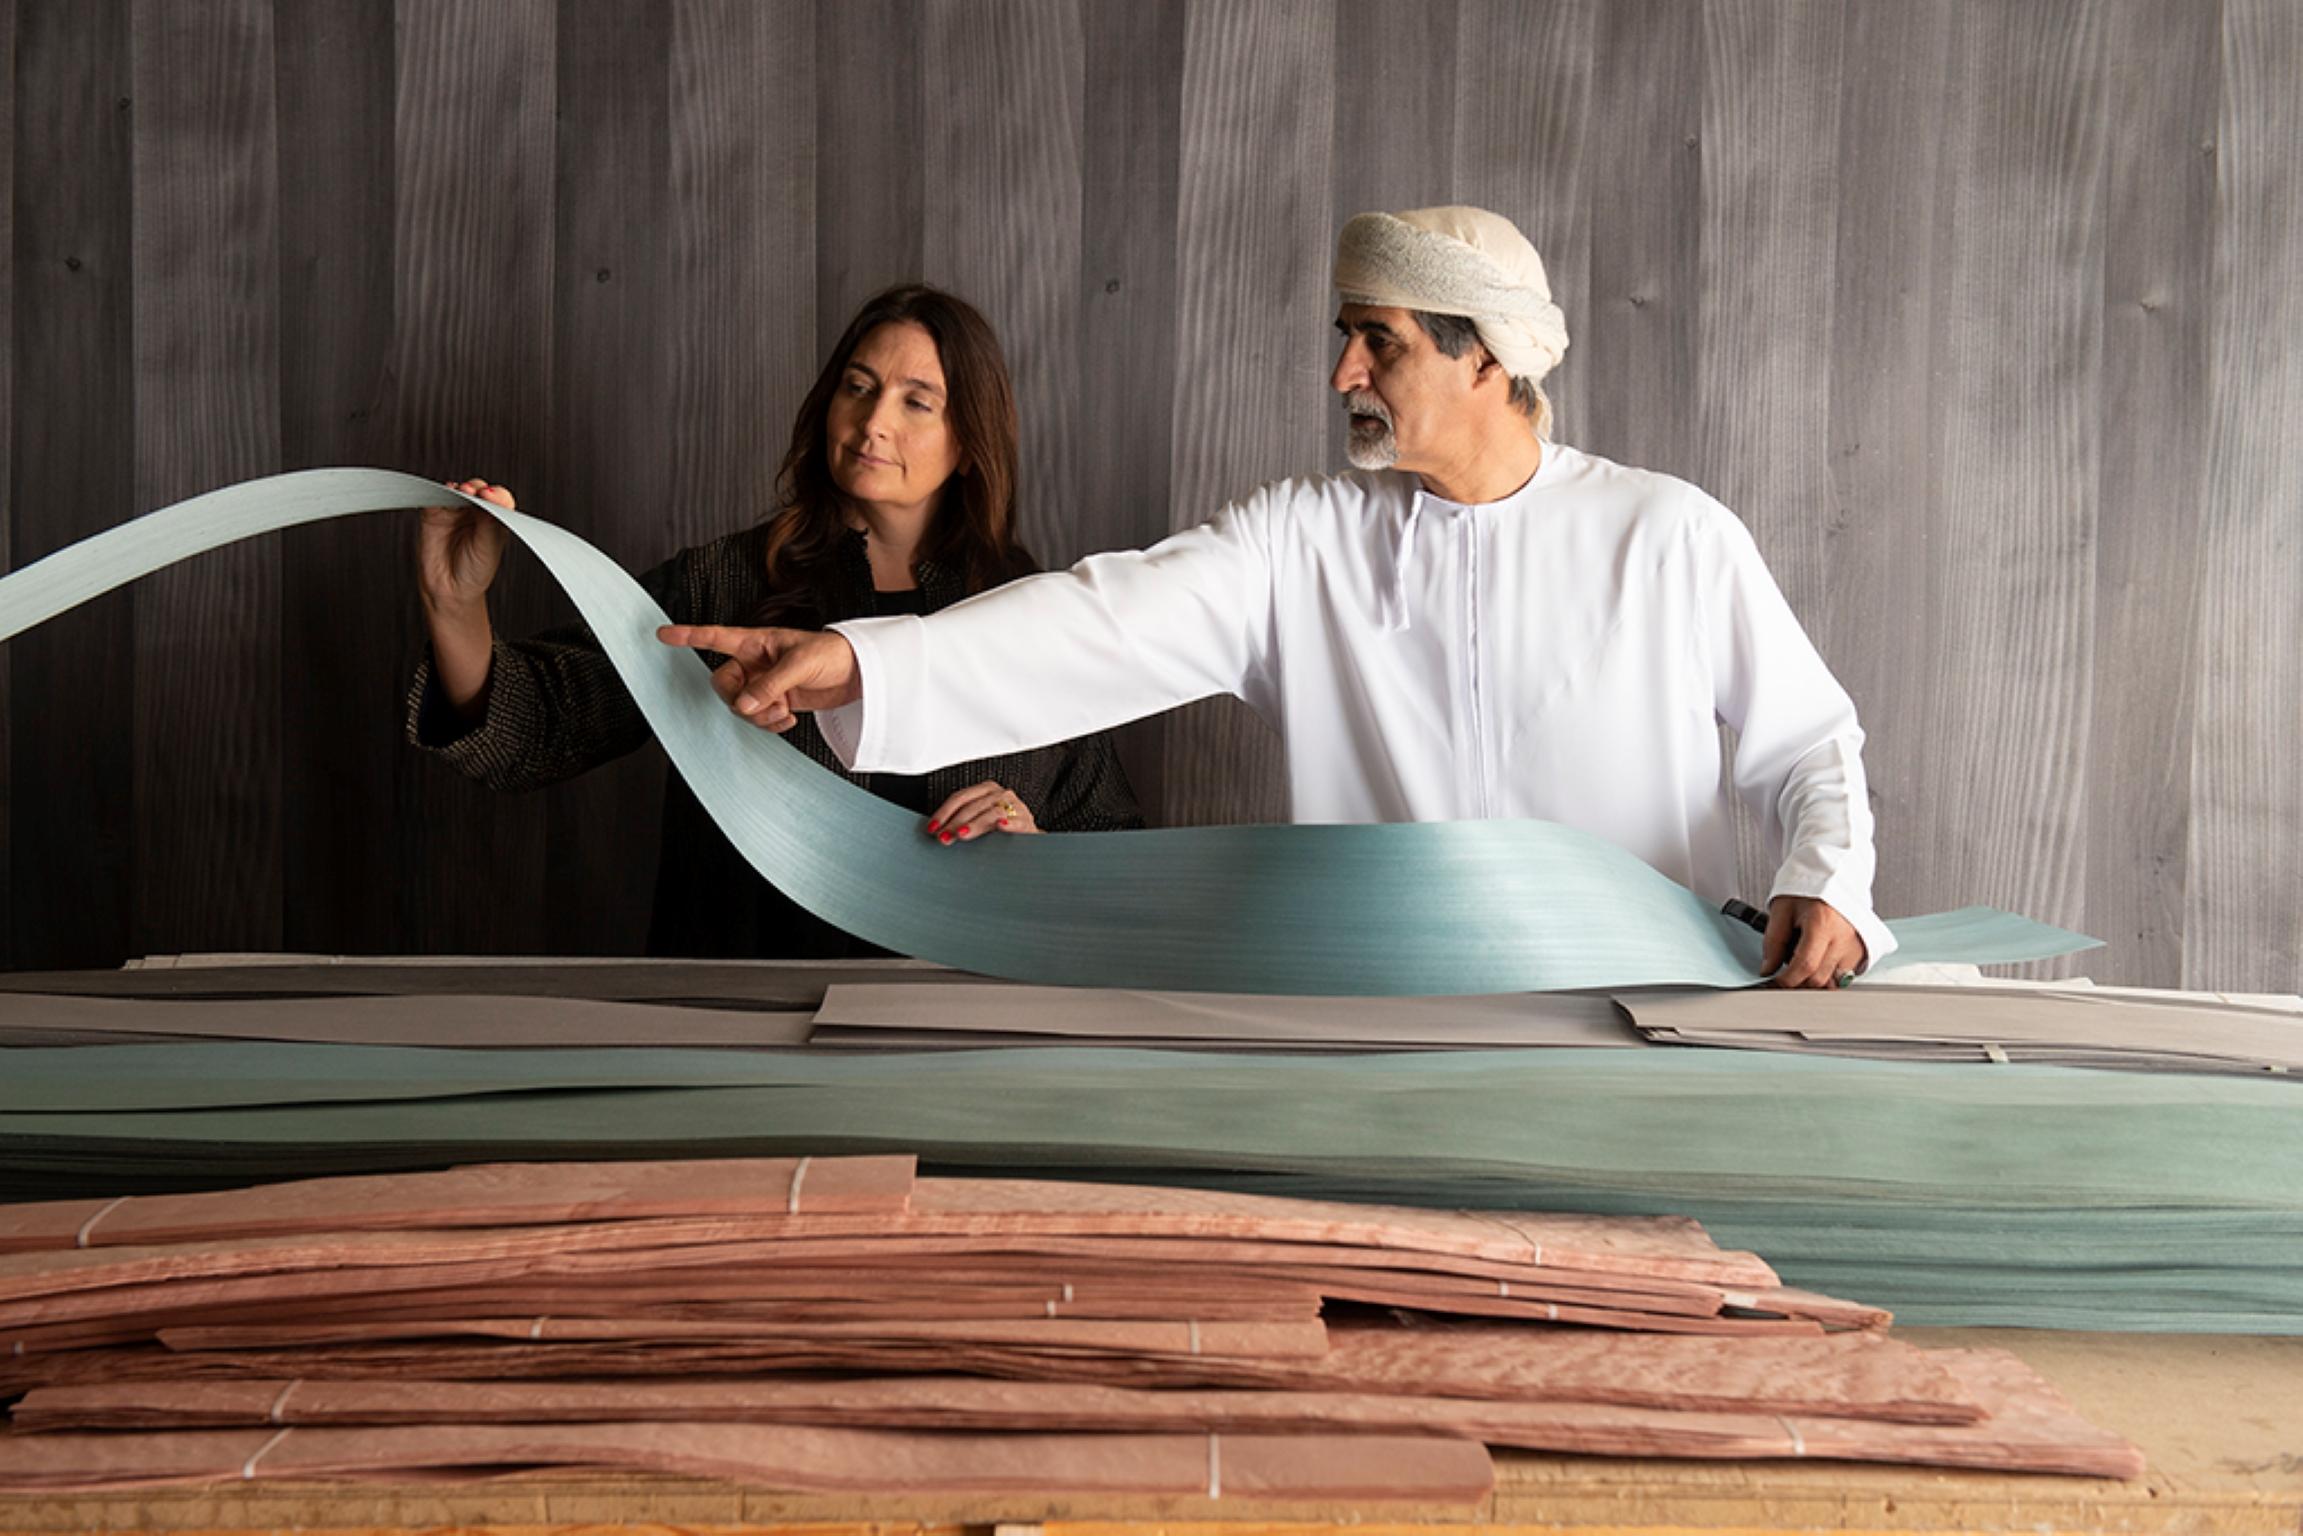 Inspiration
The Dhow family of furniture references the billowing sails of traditional Omani boats, an important part of the seafaring nation’s maritime history.

Craft
Bethan has reimagined the movement of the sails in a hand-drawn pattern,